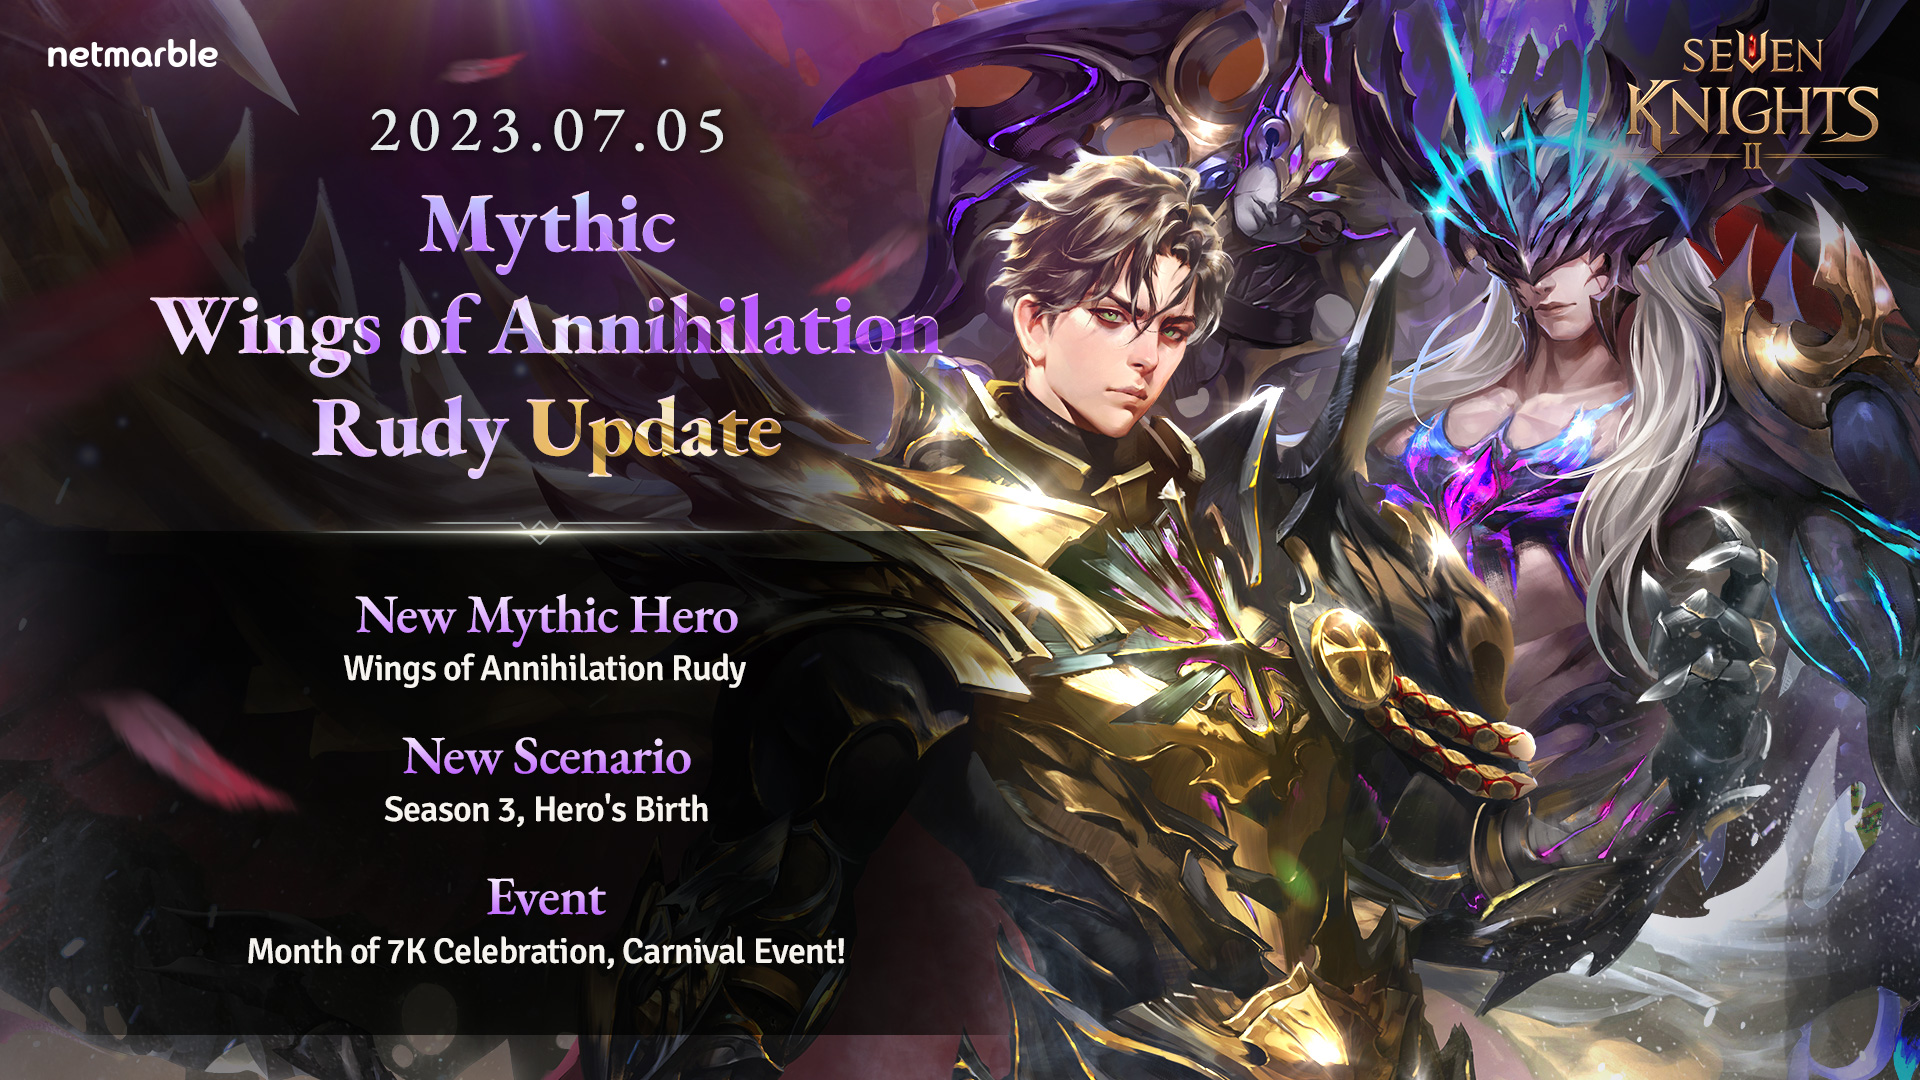 Seven Knights 2 Gets Mythic Hero Rudy, Events, and Much More in its Latest Update